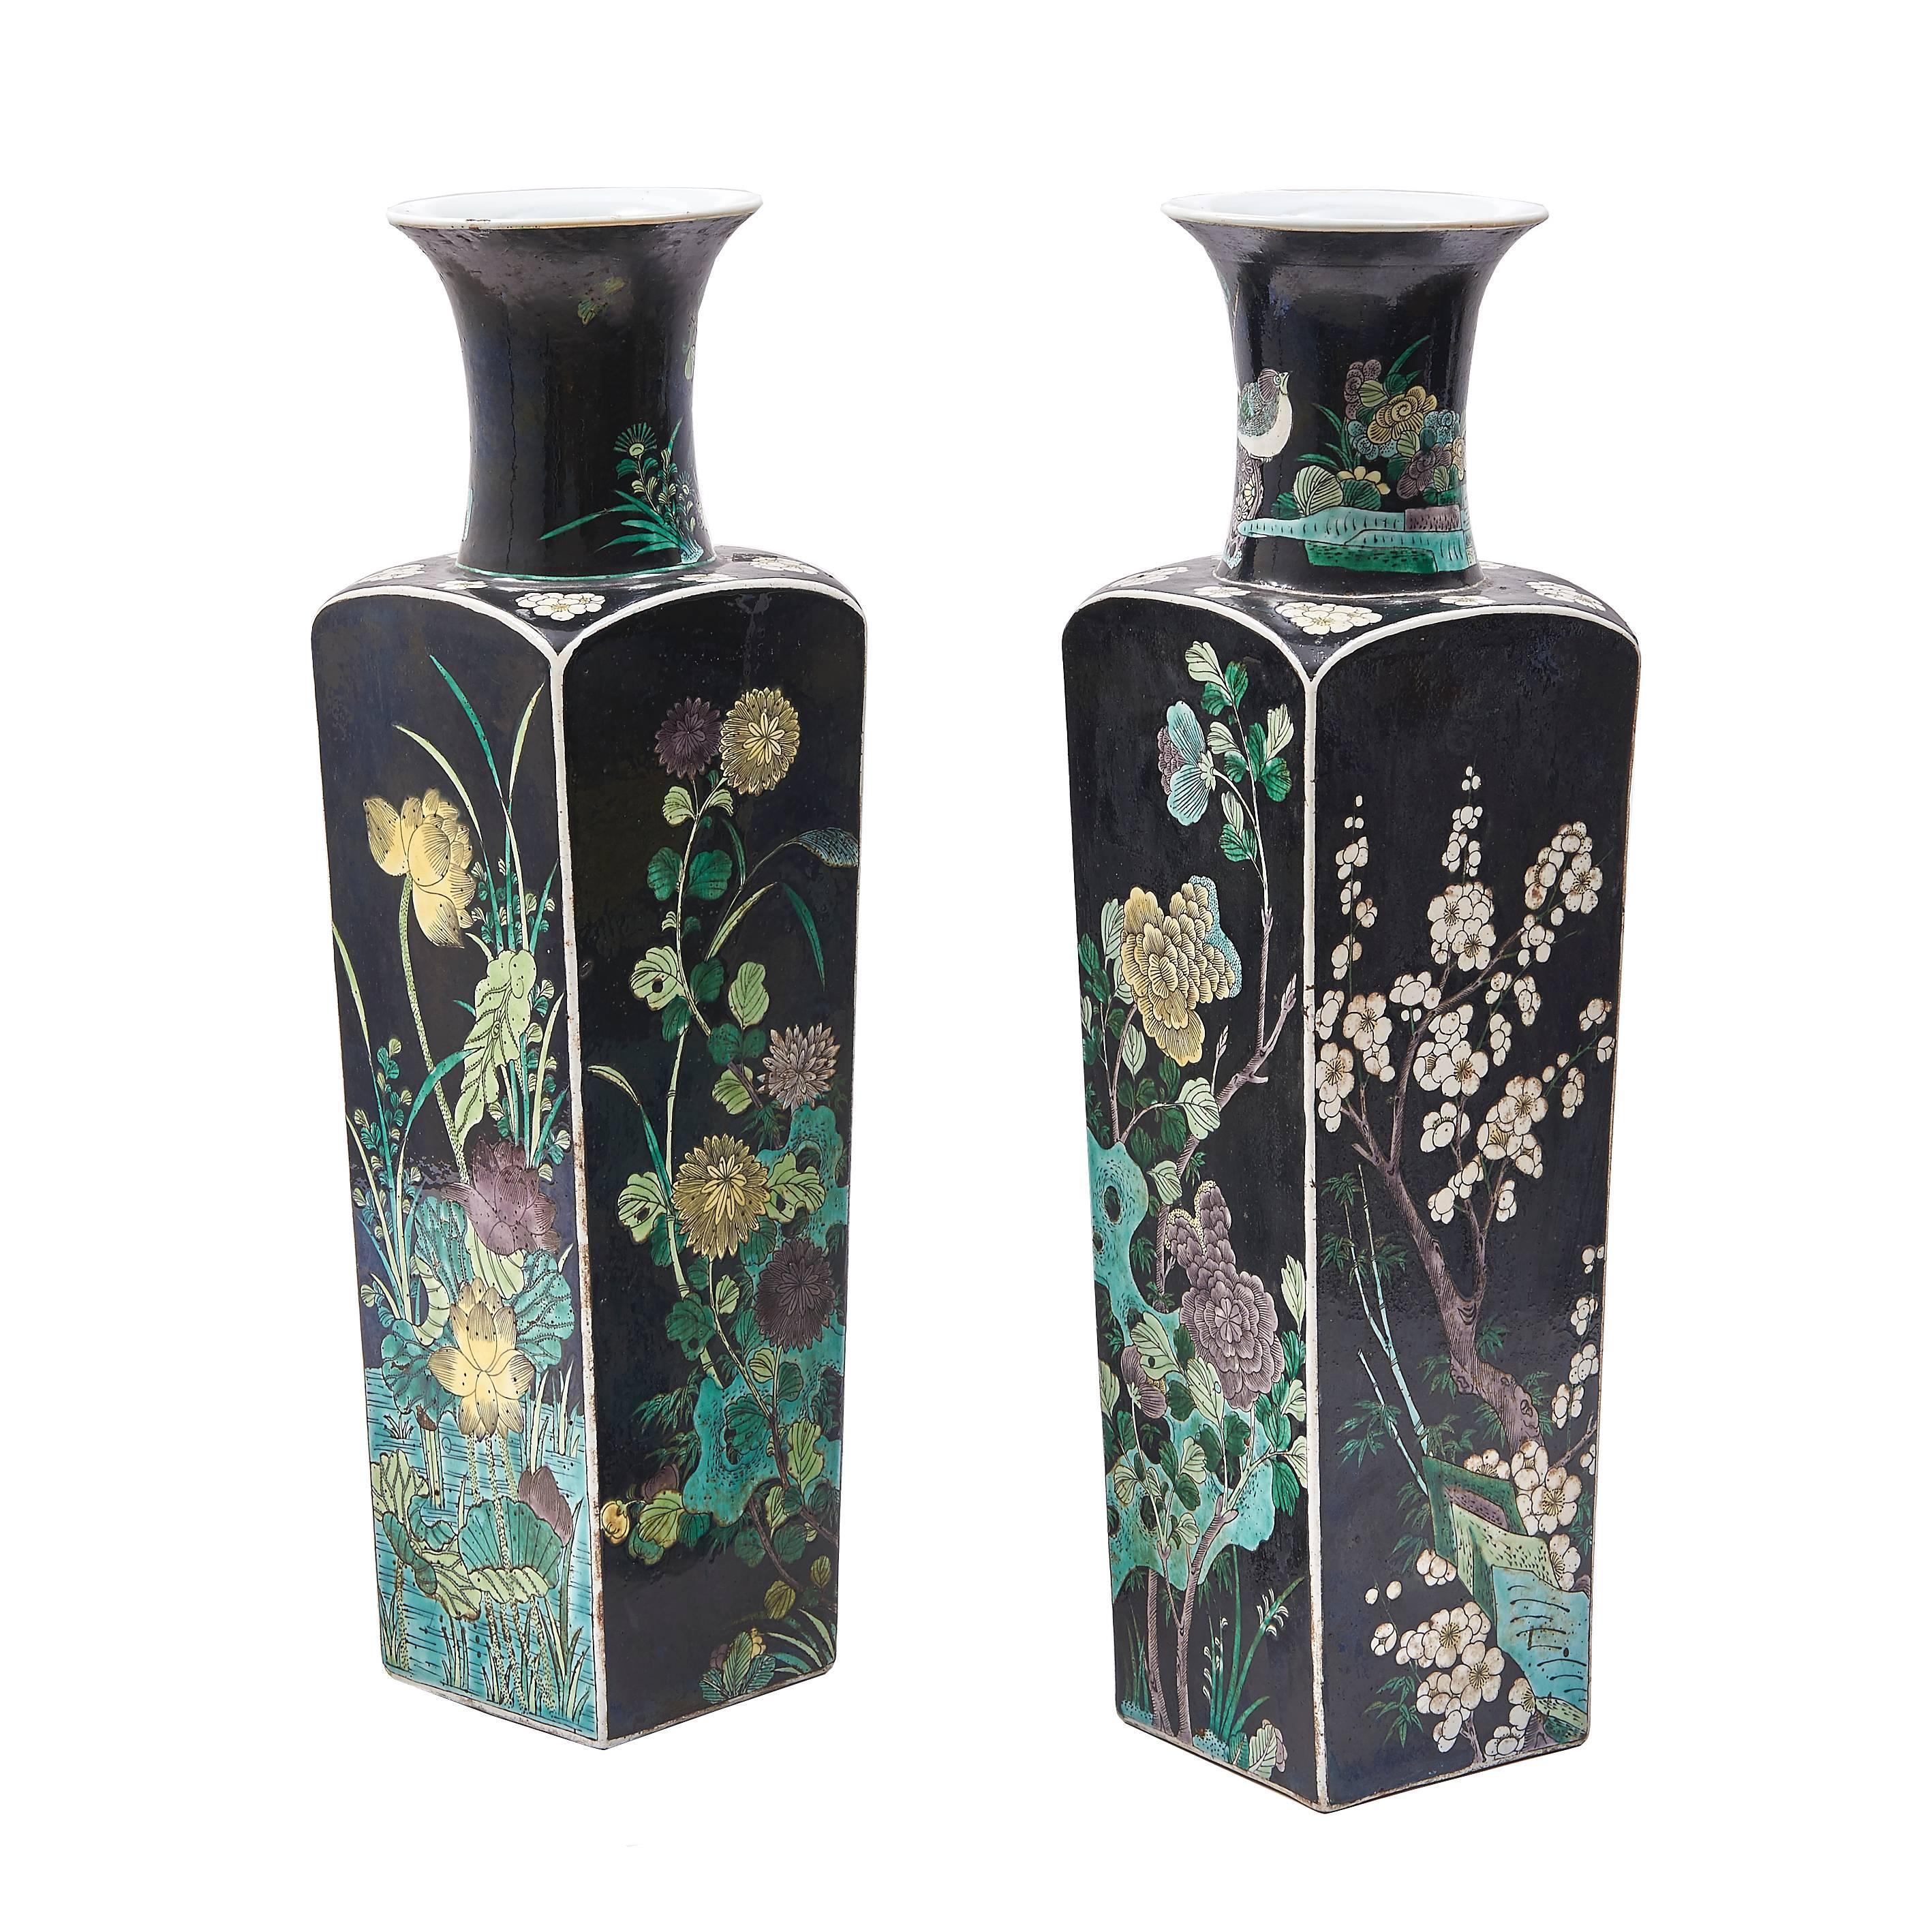 Pair of Chinese Famille Noir Porcelain Square Vases, circa 1860